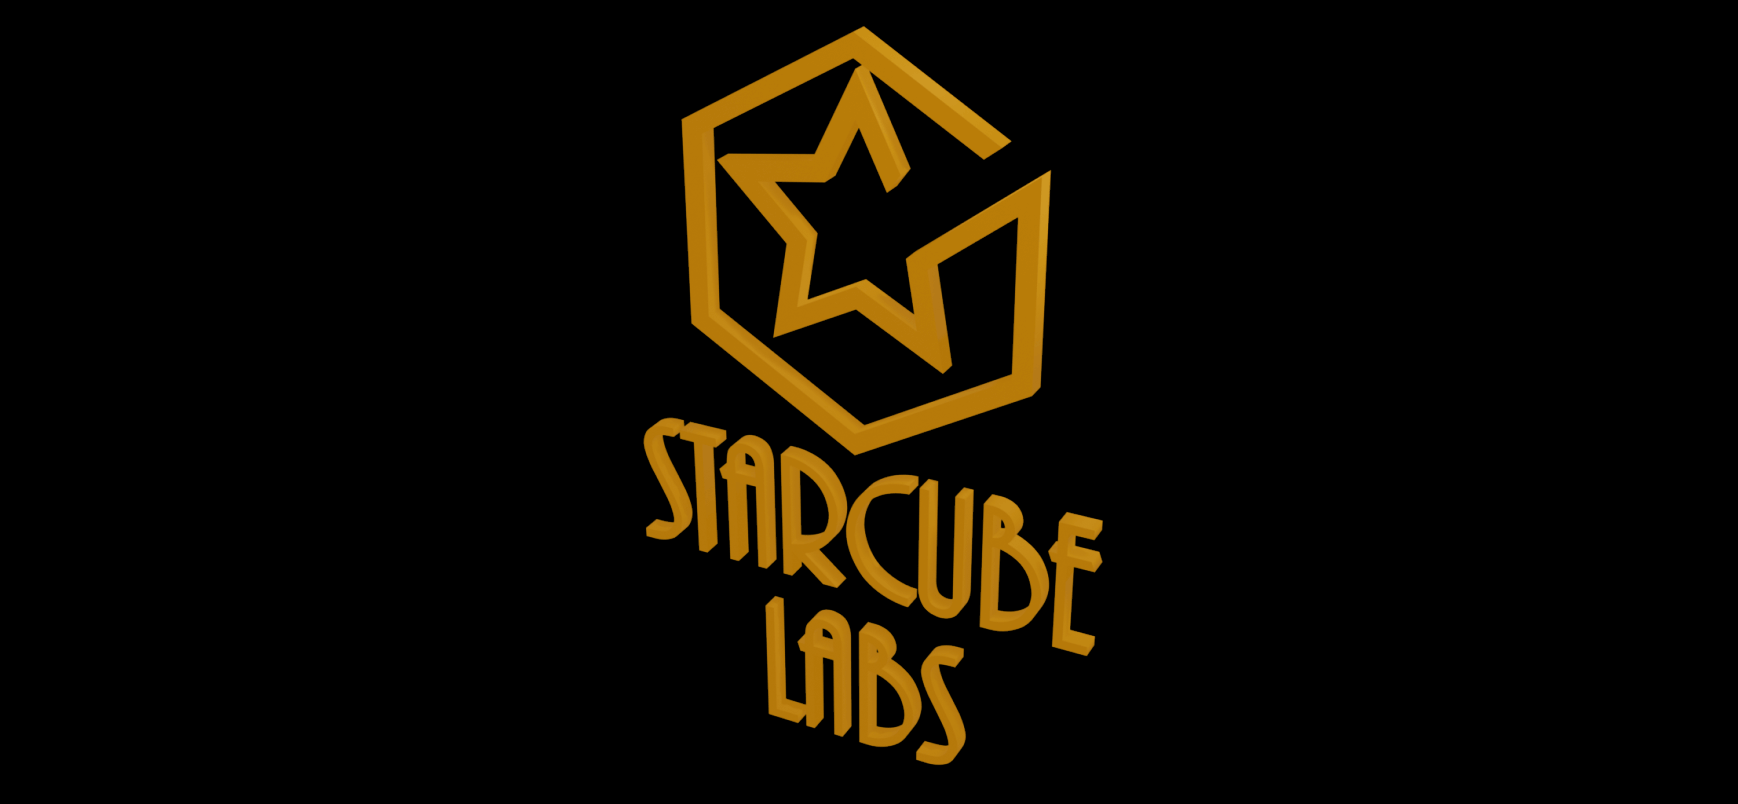 Welcome to Starcube Labs!